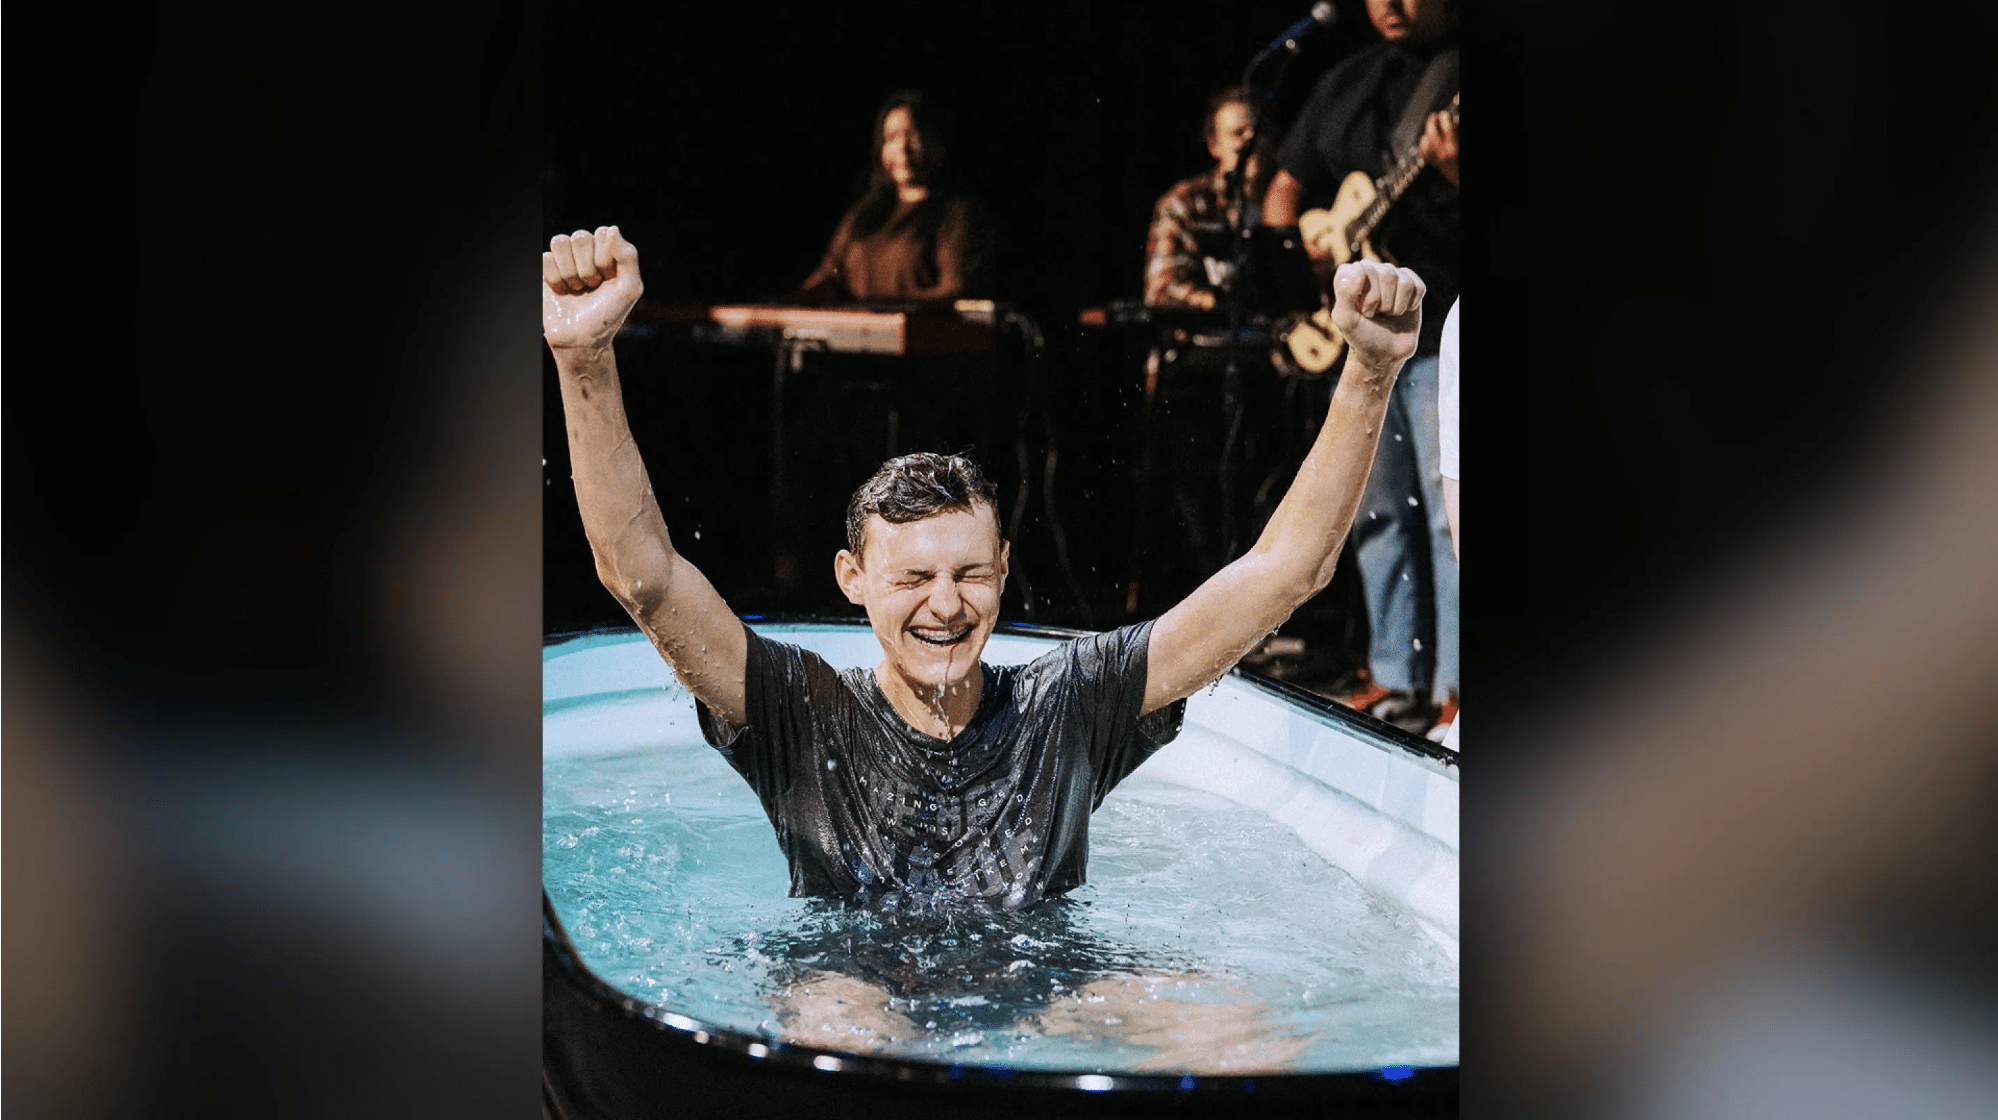 God is still moving at Texas A&M with ‘No Signs of Slowing Down’ – Hundreds baptized in Corpus Christi